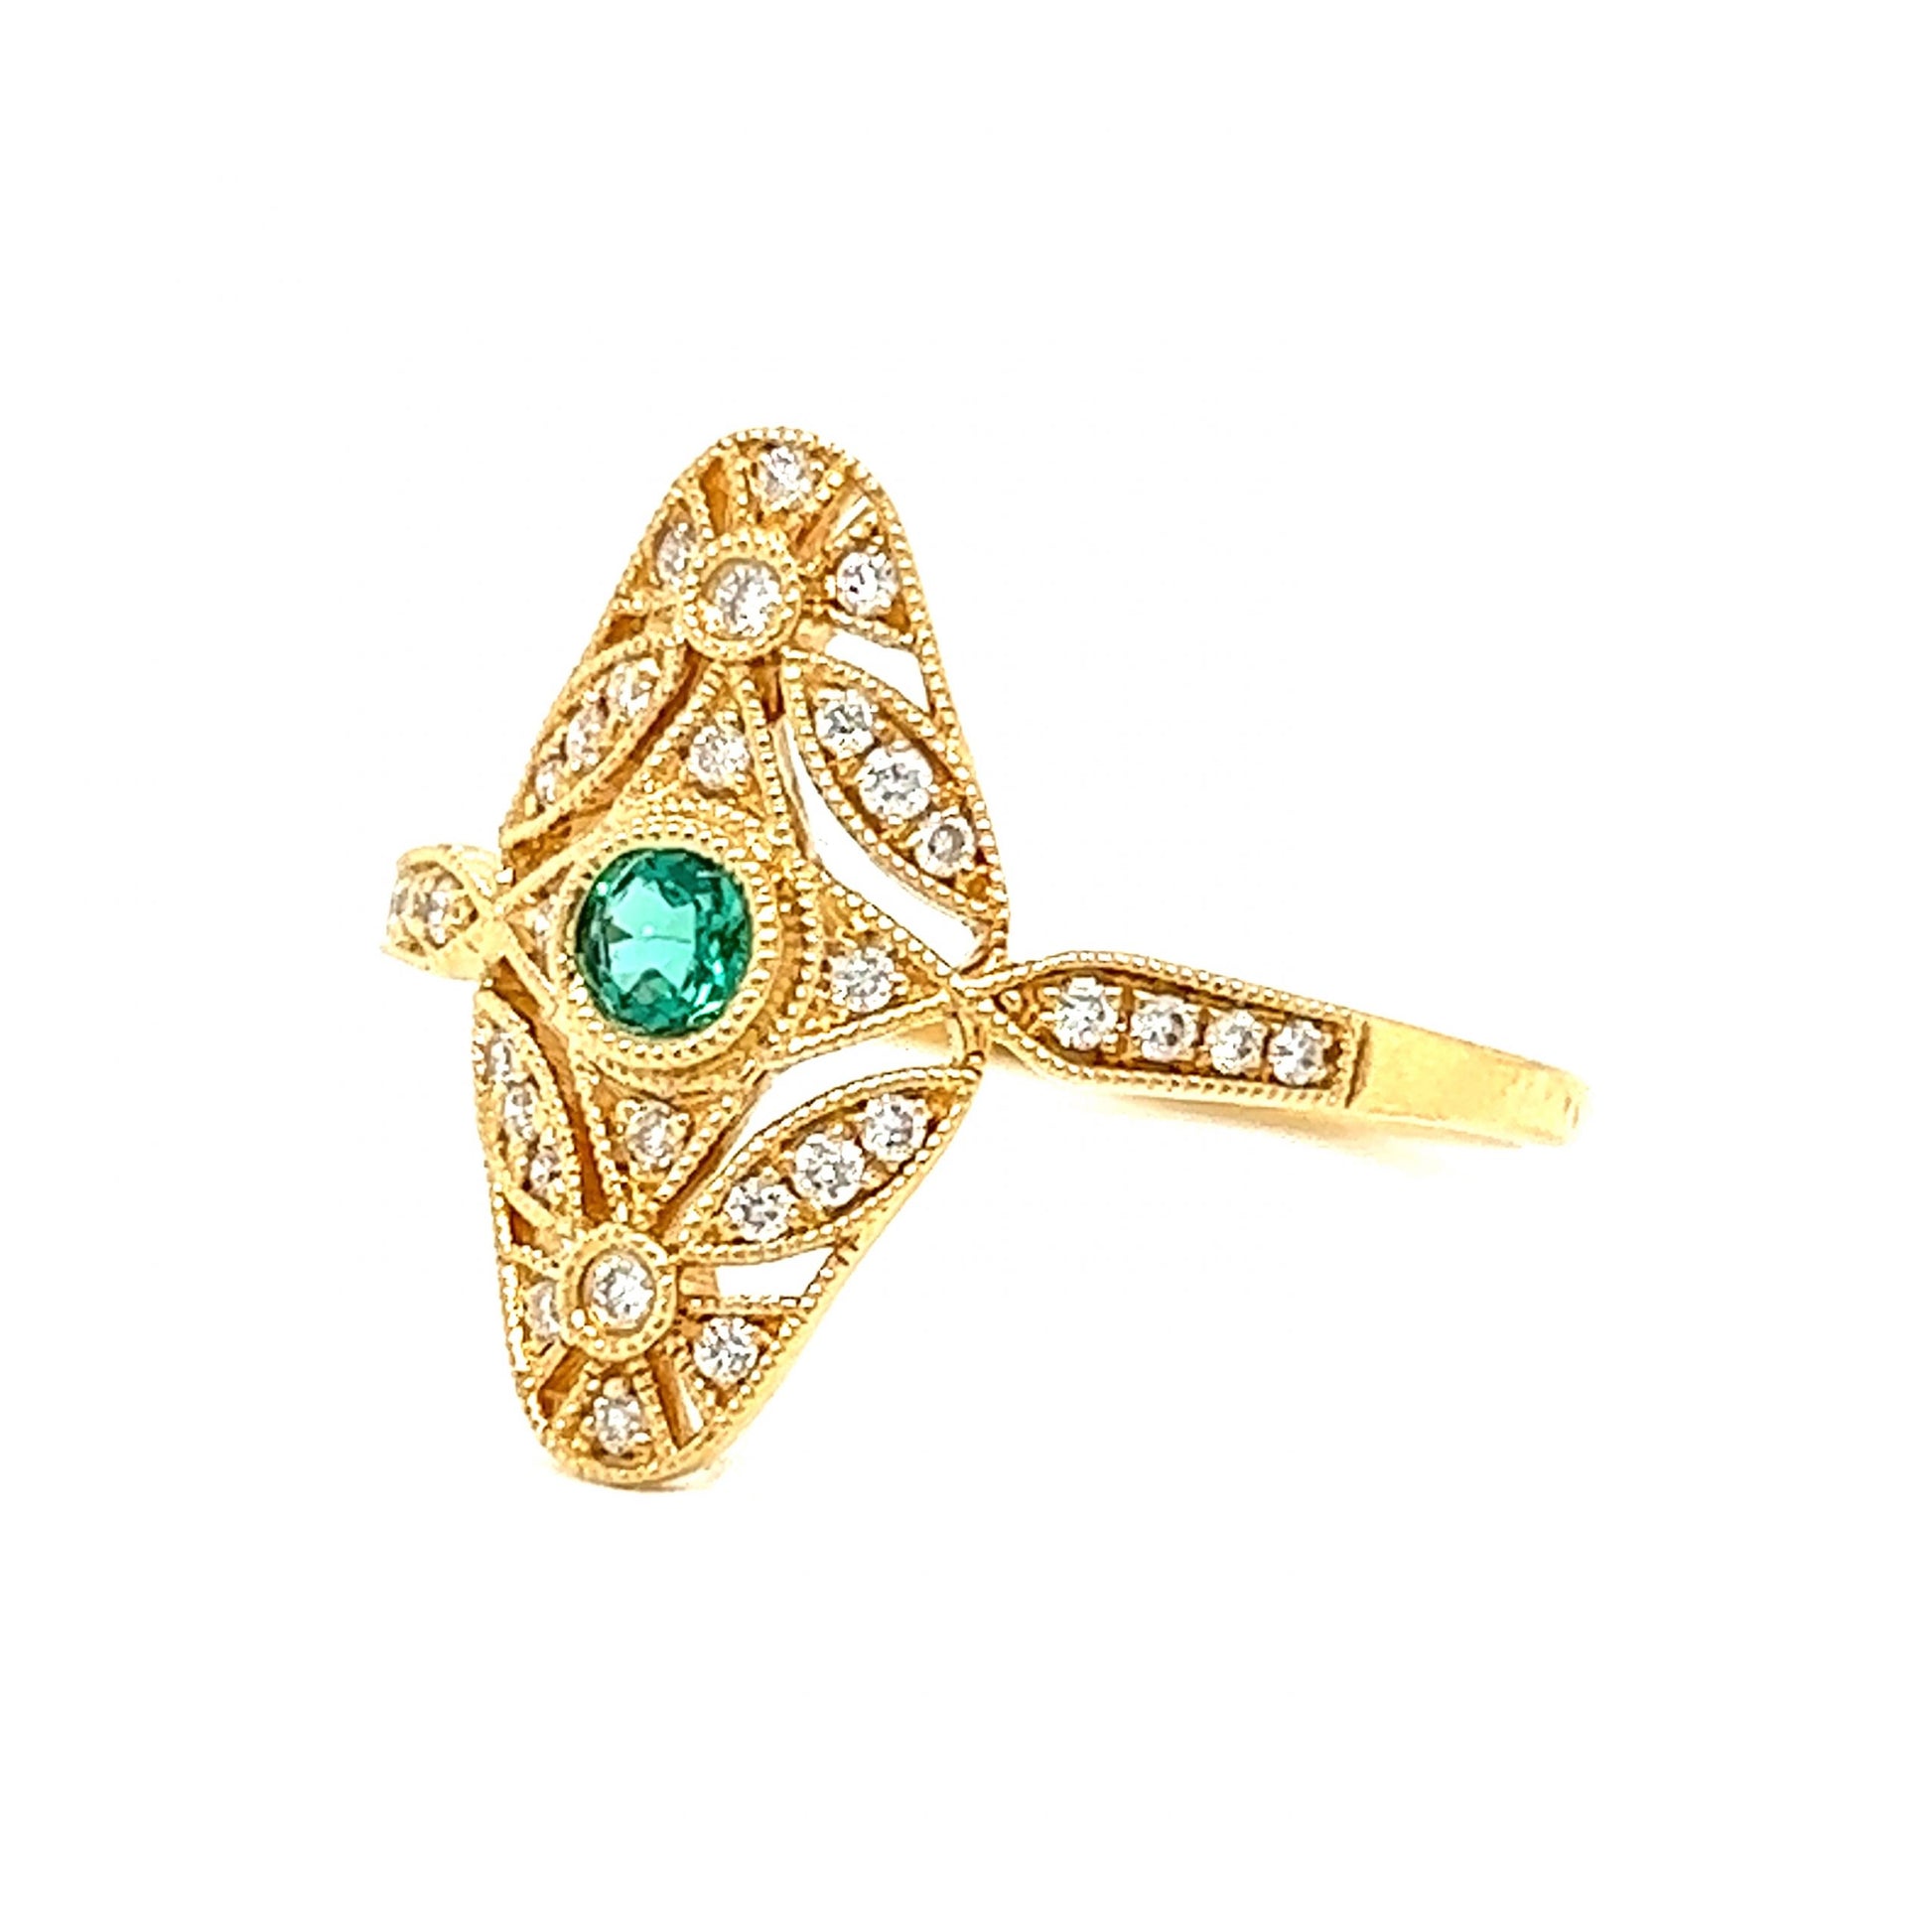 Antique Inspired Round Emerald & Diamond Ring in 18k GoldComposition: 18 Karat Yellow GoldRing Size: 6.5Total Diamond Weight: .15 ctTotal Gram Weight: 2.4 gInscription: JHK 18k